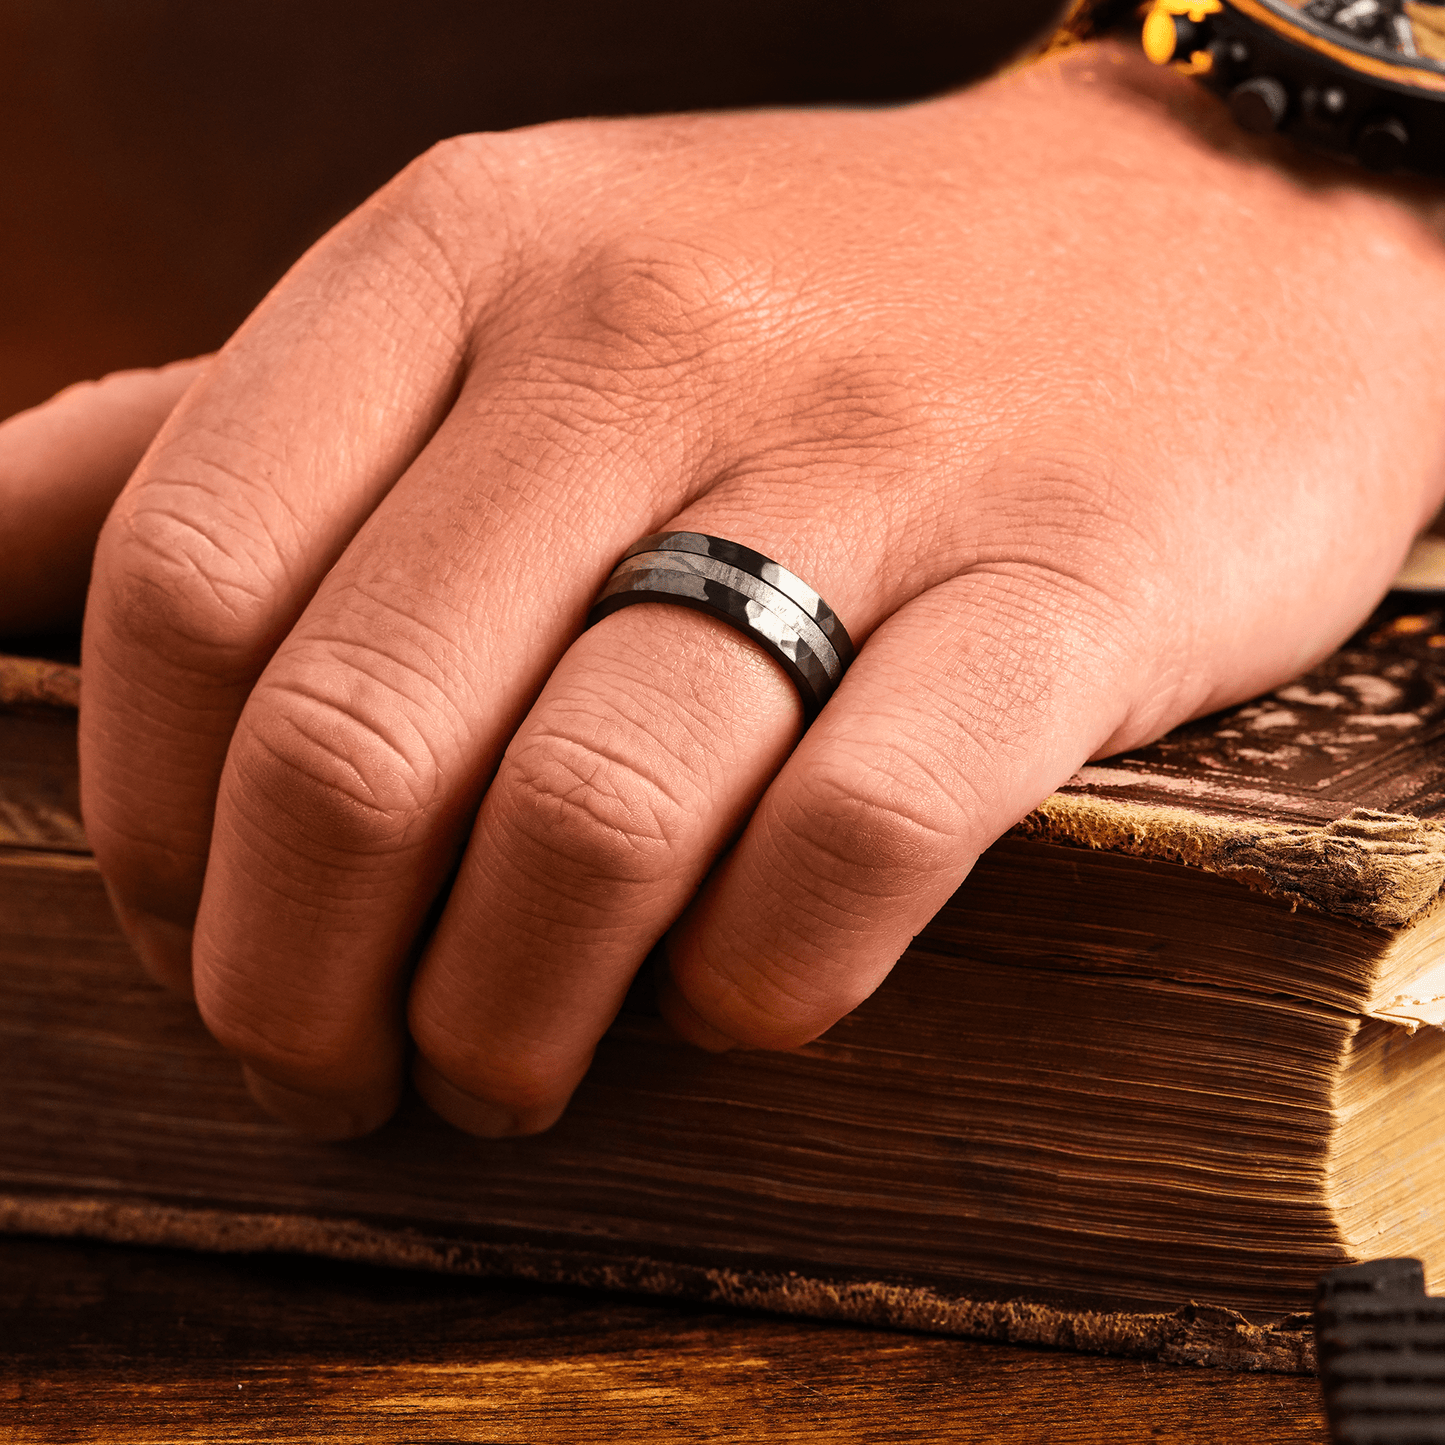 The Physicist - Men's Wedding Rings - Manly Bands